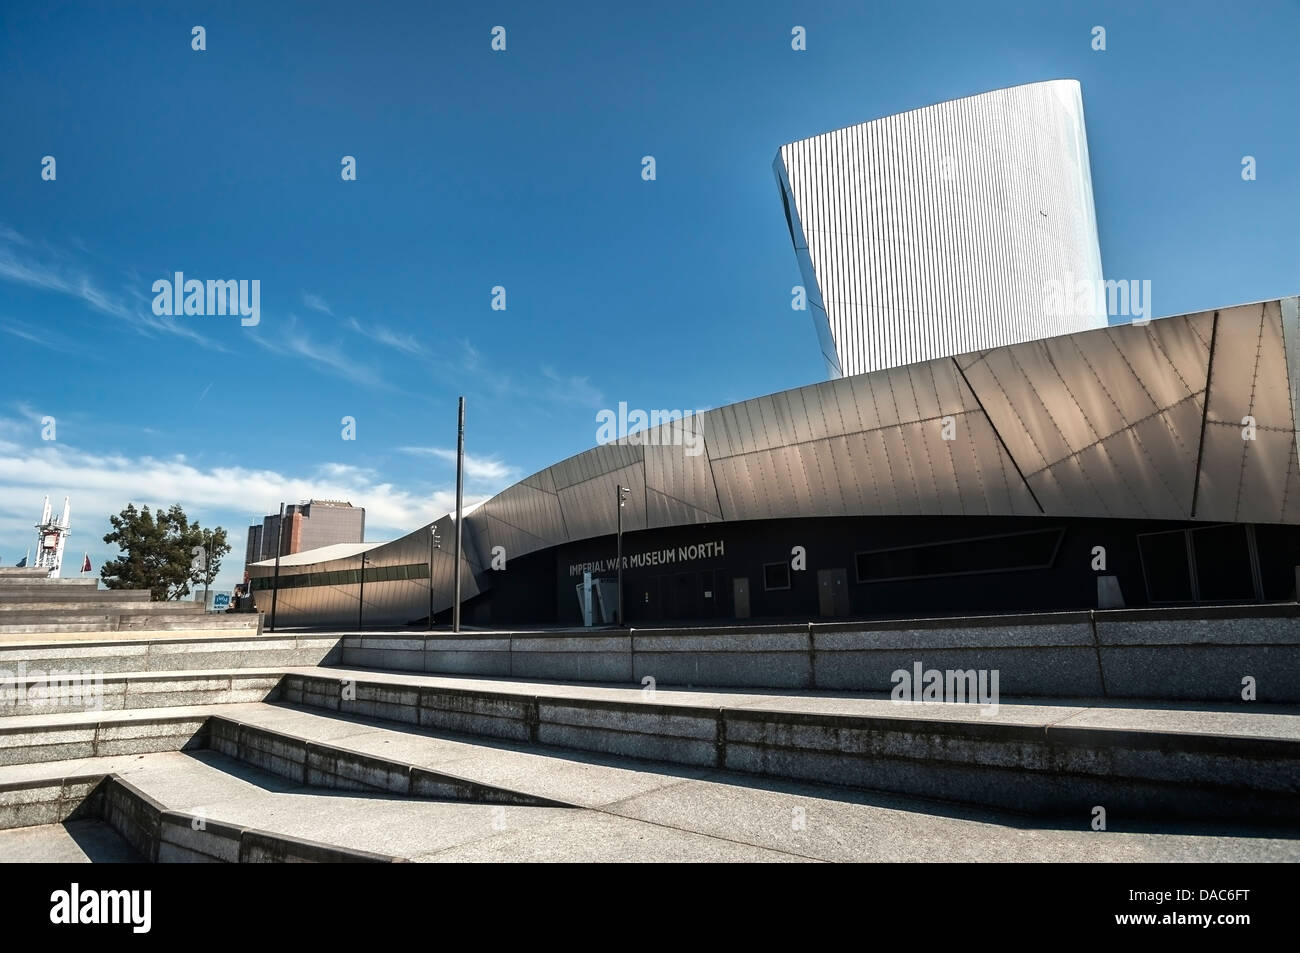 Imperial War Museum North, Salford Quays, Greater Manchester, Reino Unido Foto de stock